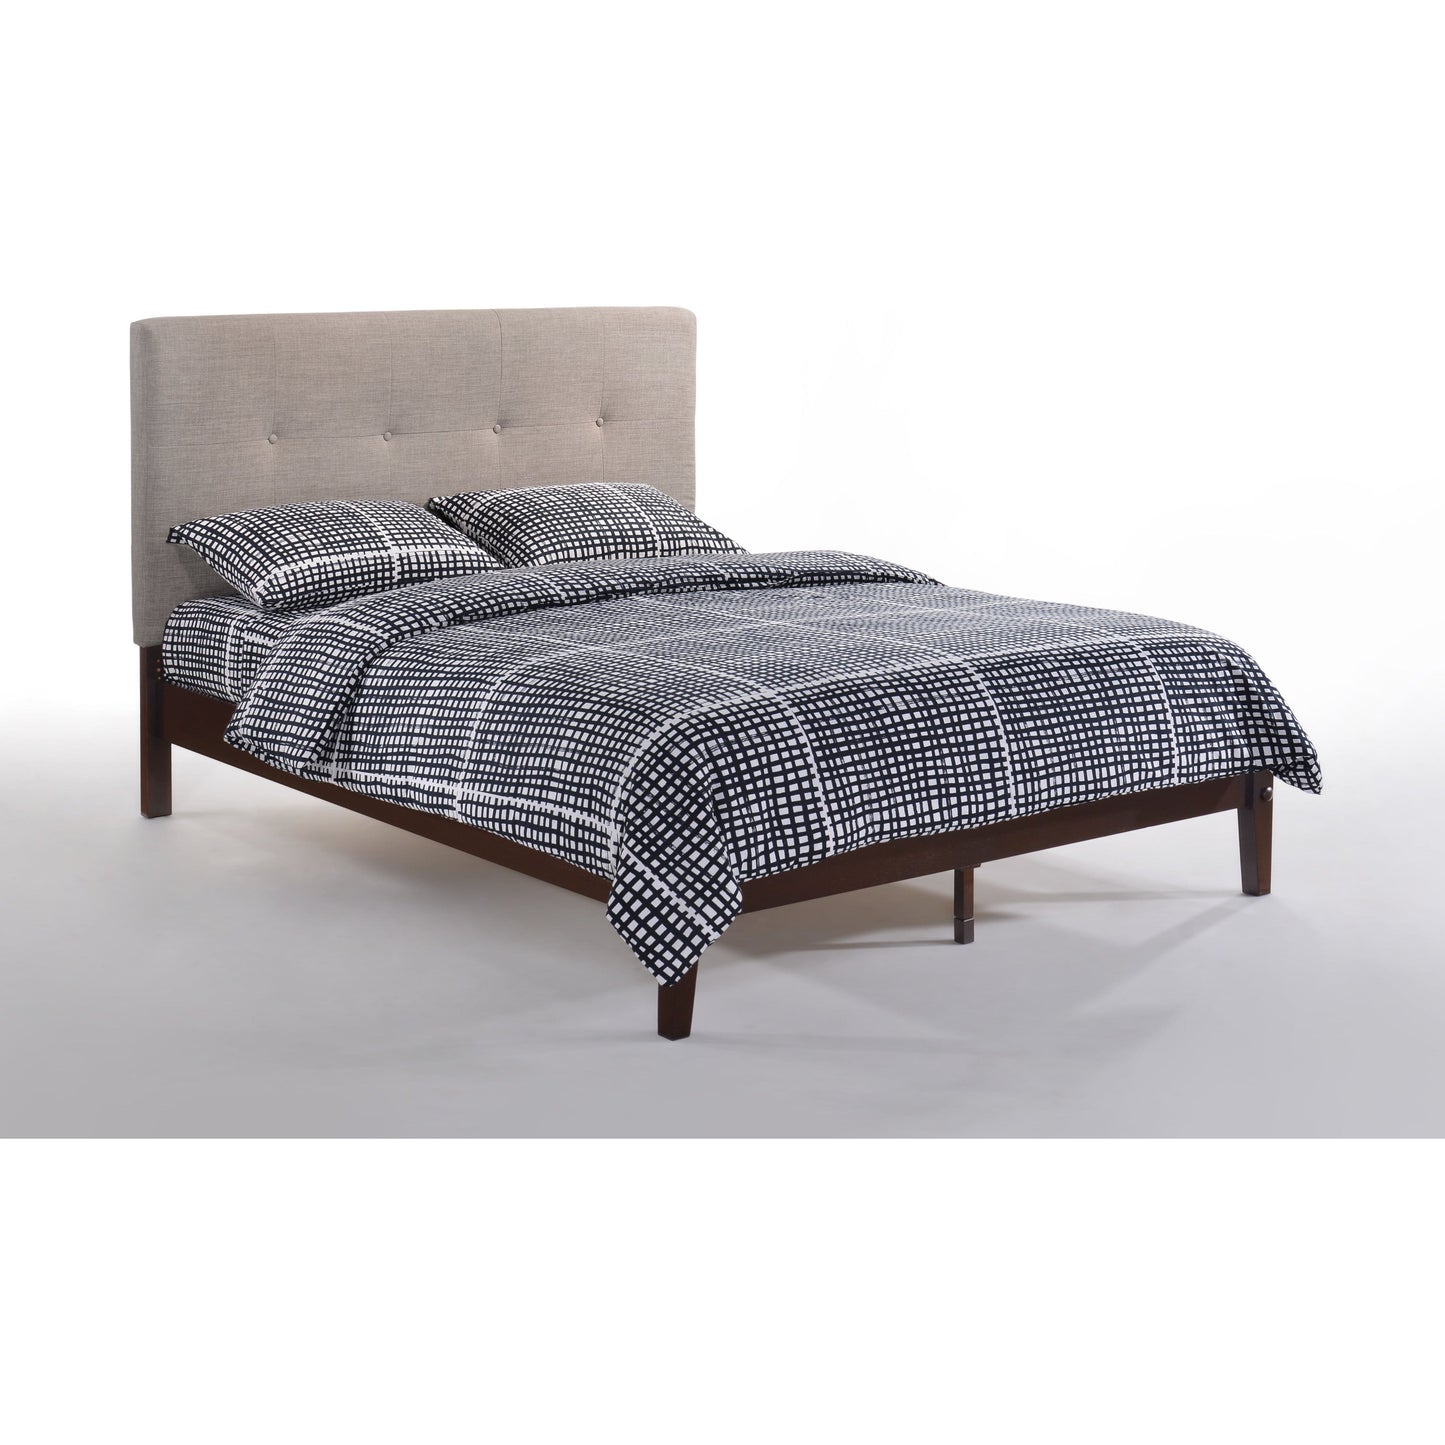 The Bedroom Emporium Paprika Twin Bed in Charcoal with Cherry Finish Frame (K Series)